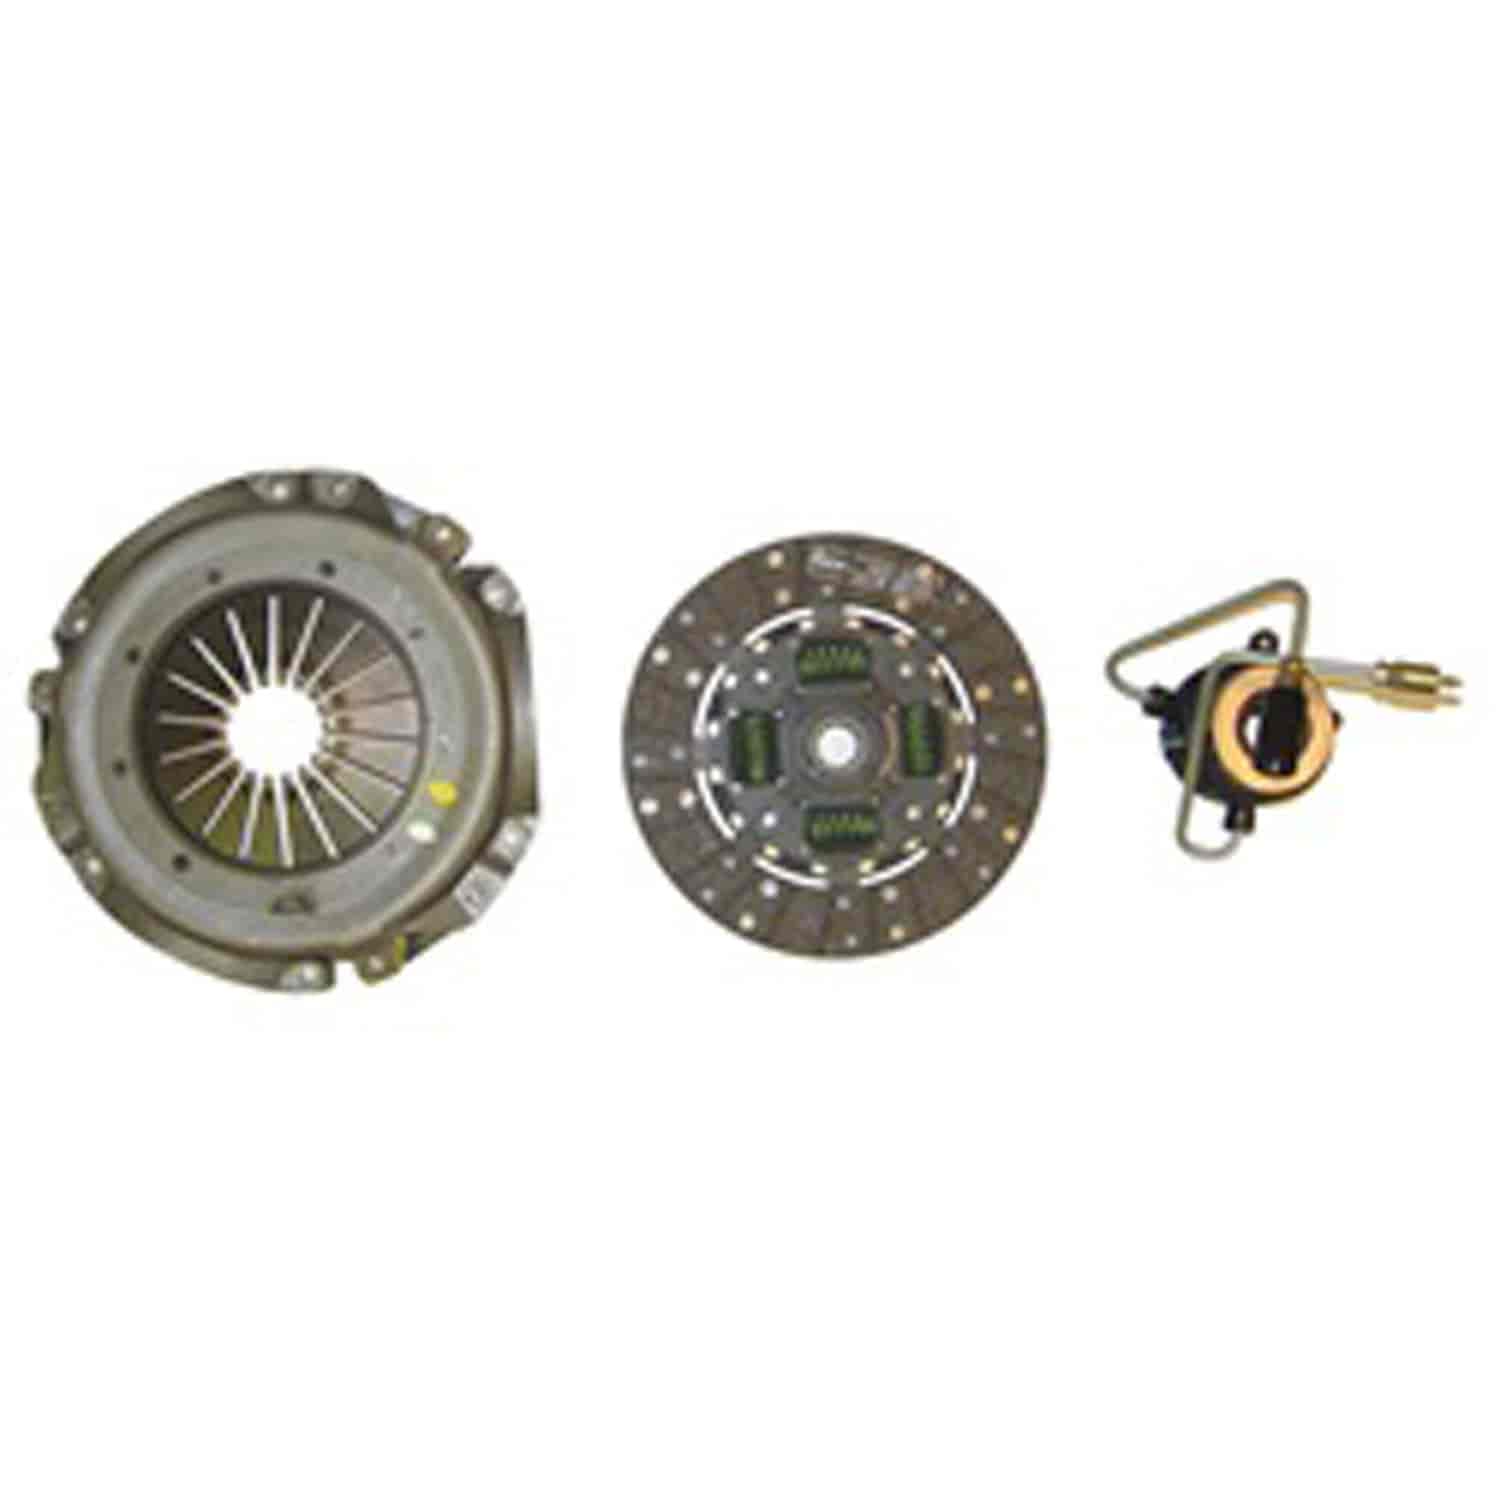 This regular clutch kit 87-90 Cherokee Comanche and Wrangler 2.5L. Regular clutch kit includes the p